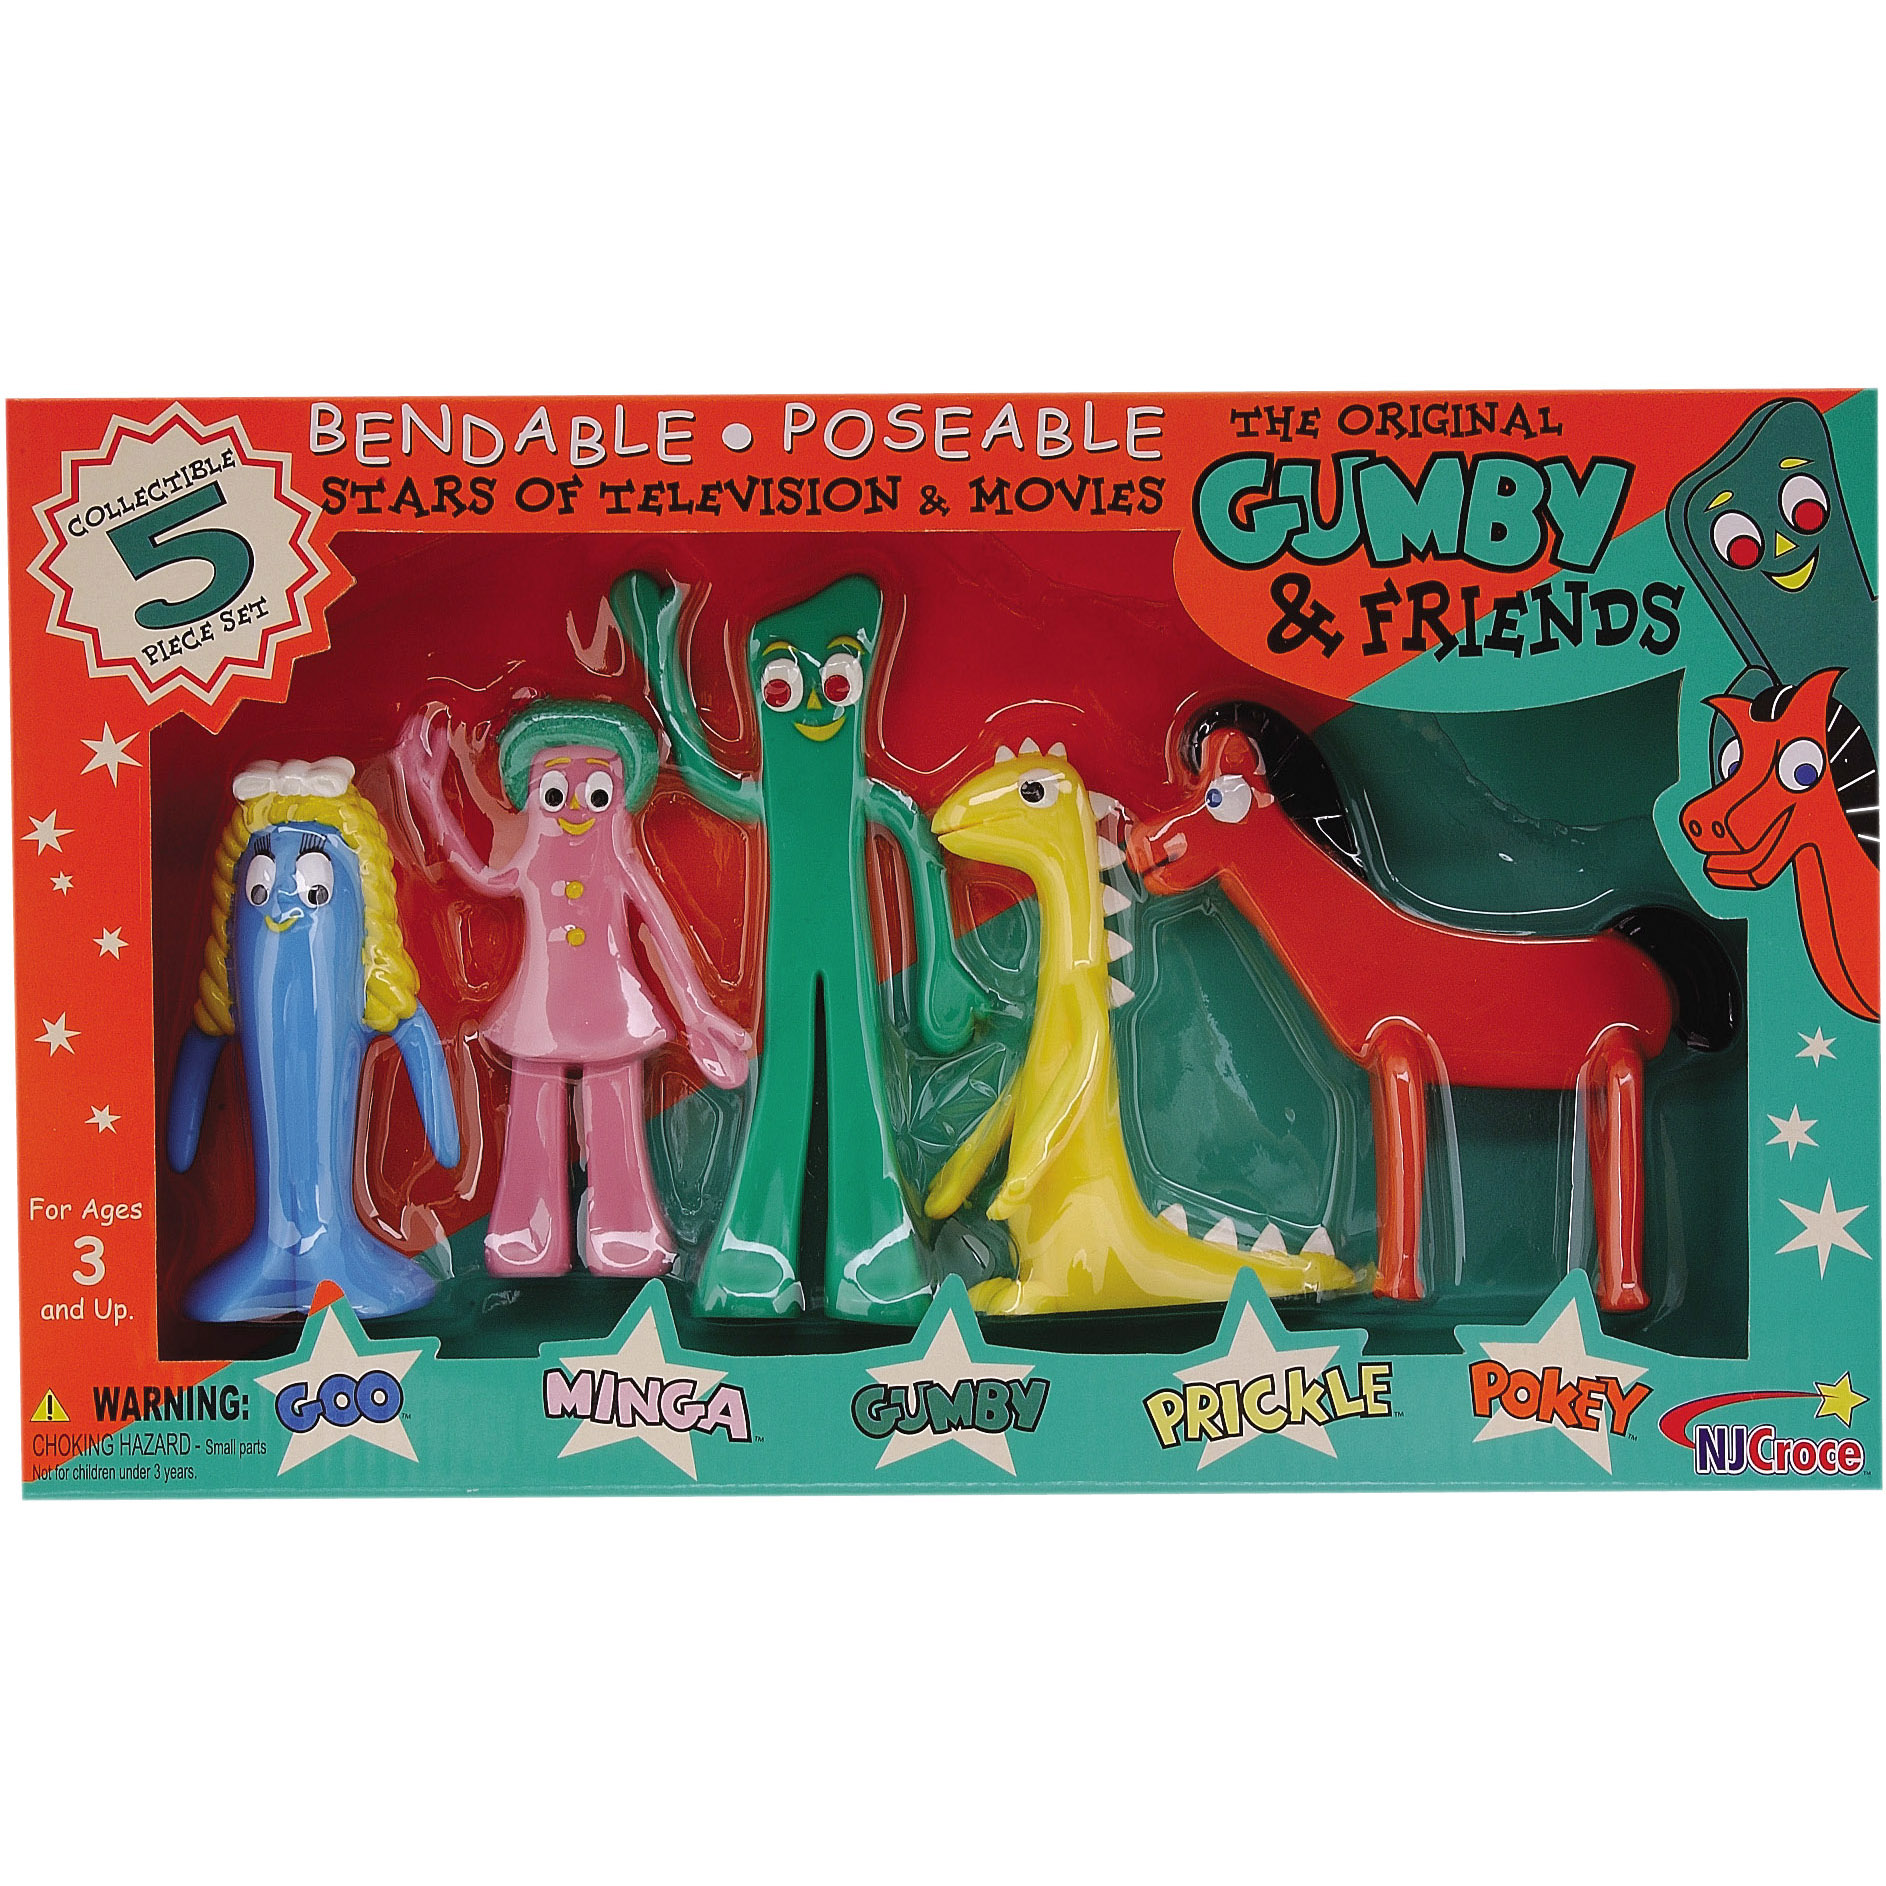 The original gumby and friends bendable poseable set.